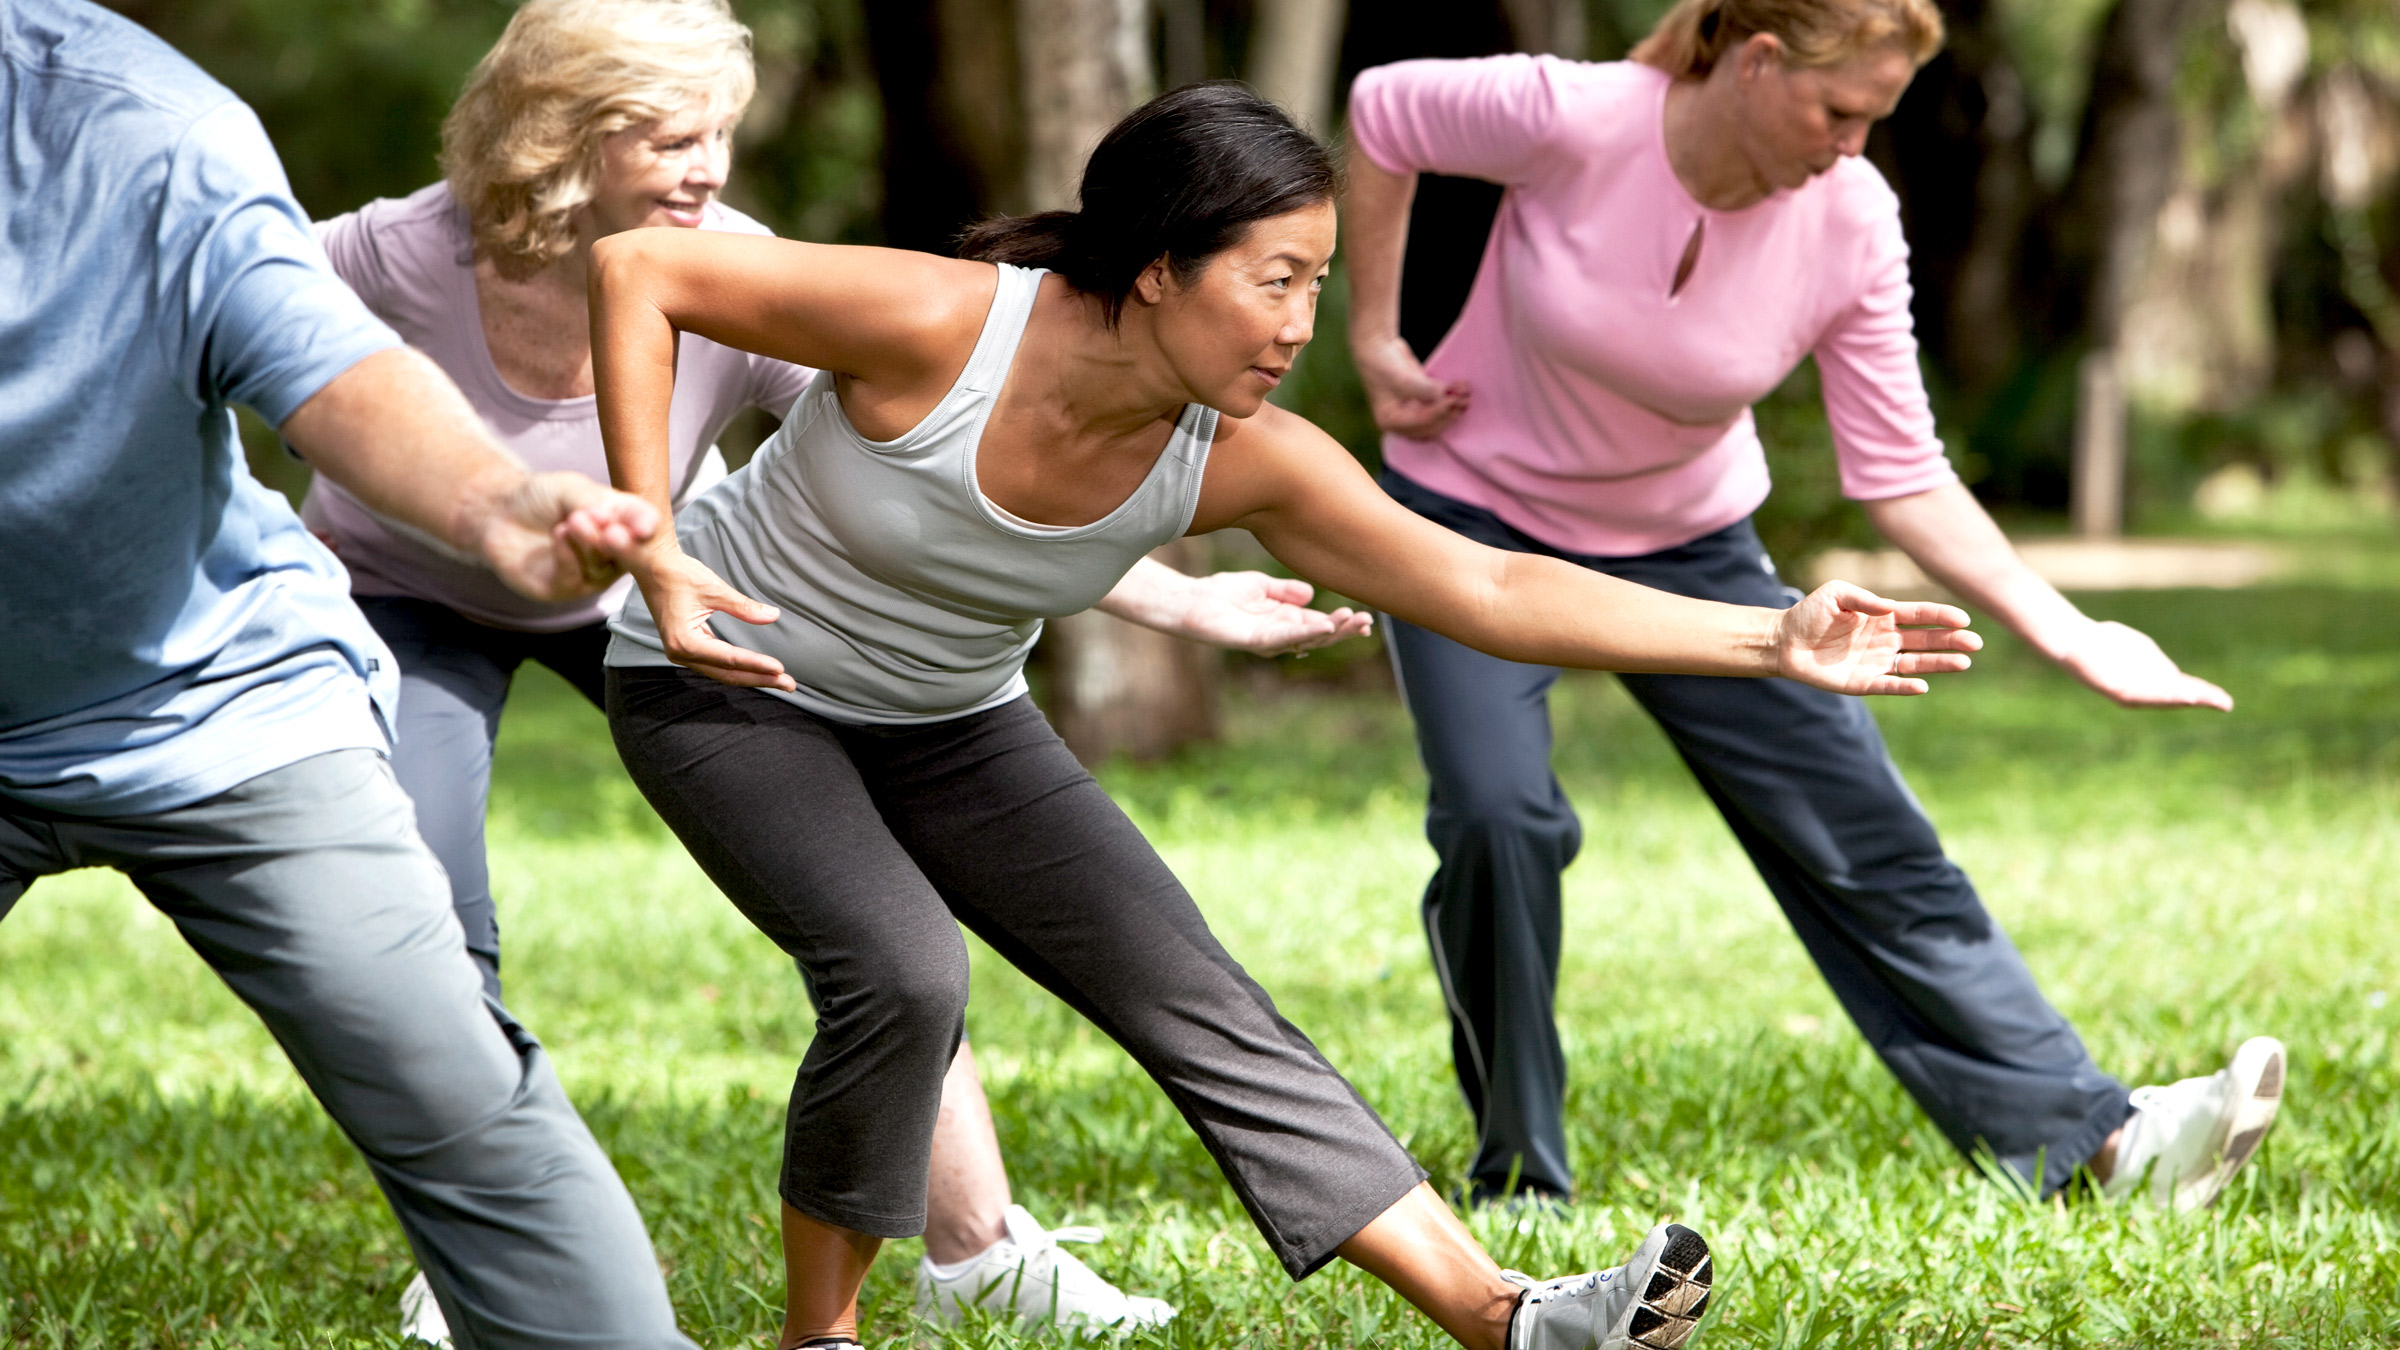 Tai Chi Exercise May Lower Blood Pressure More Than Cardio: Study